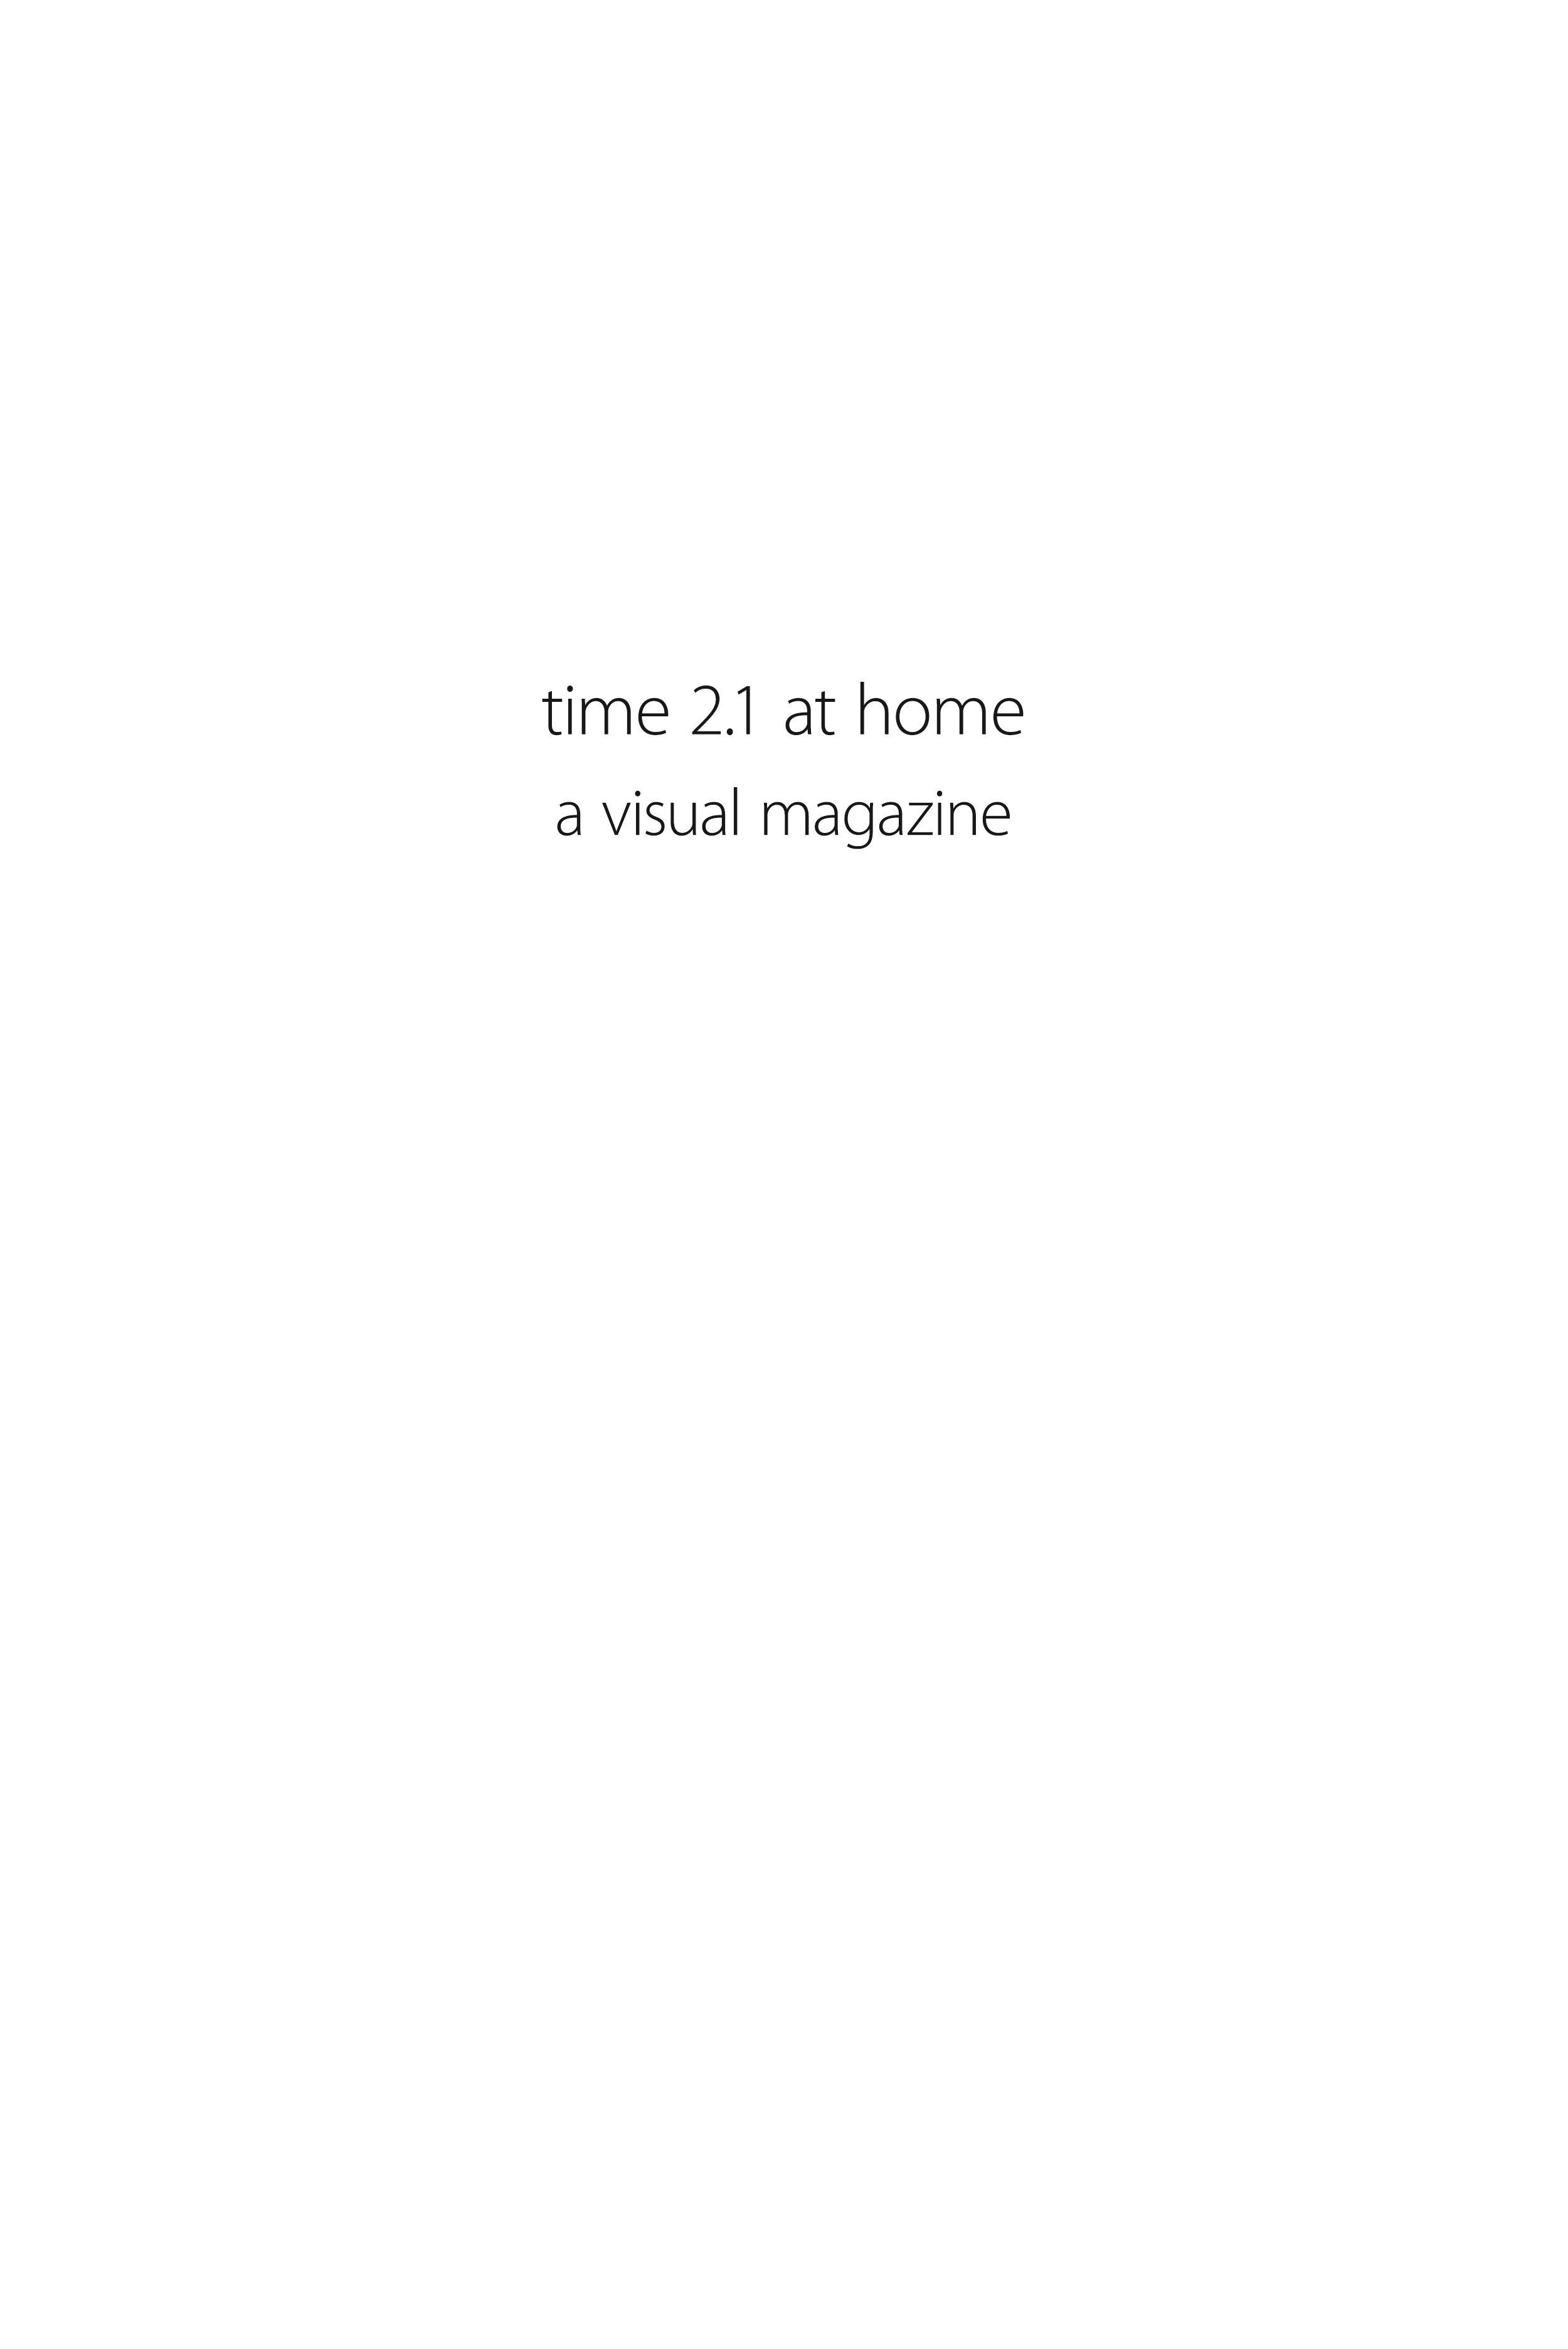 Cover NEWTIME time 21 home.png